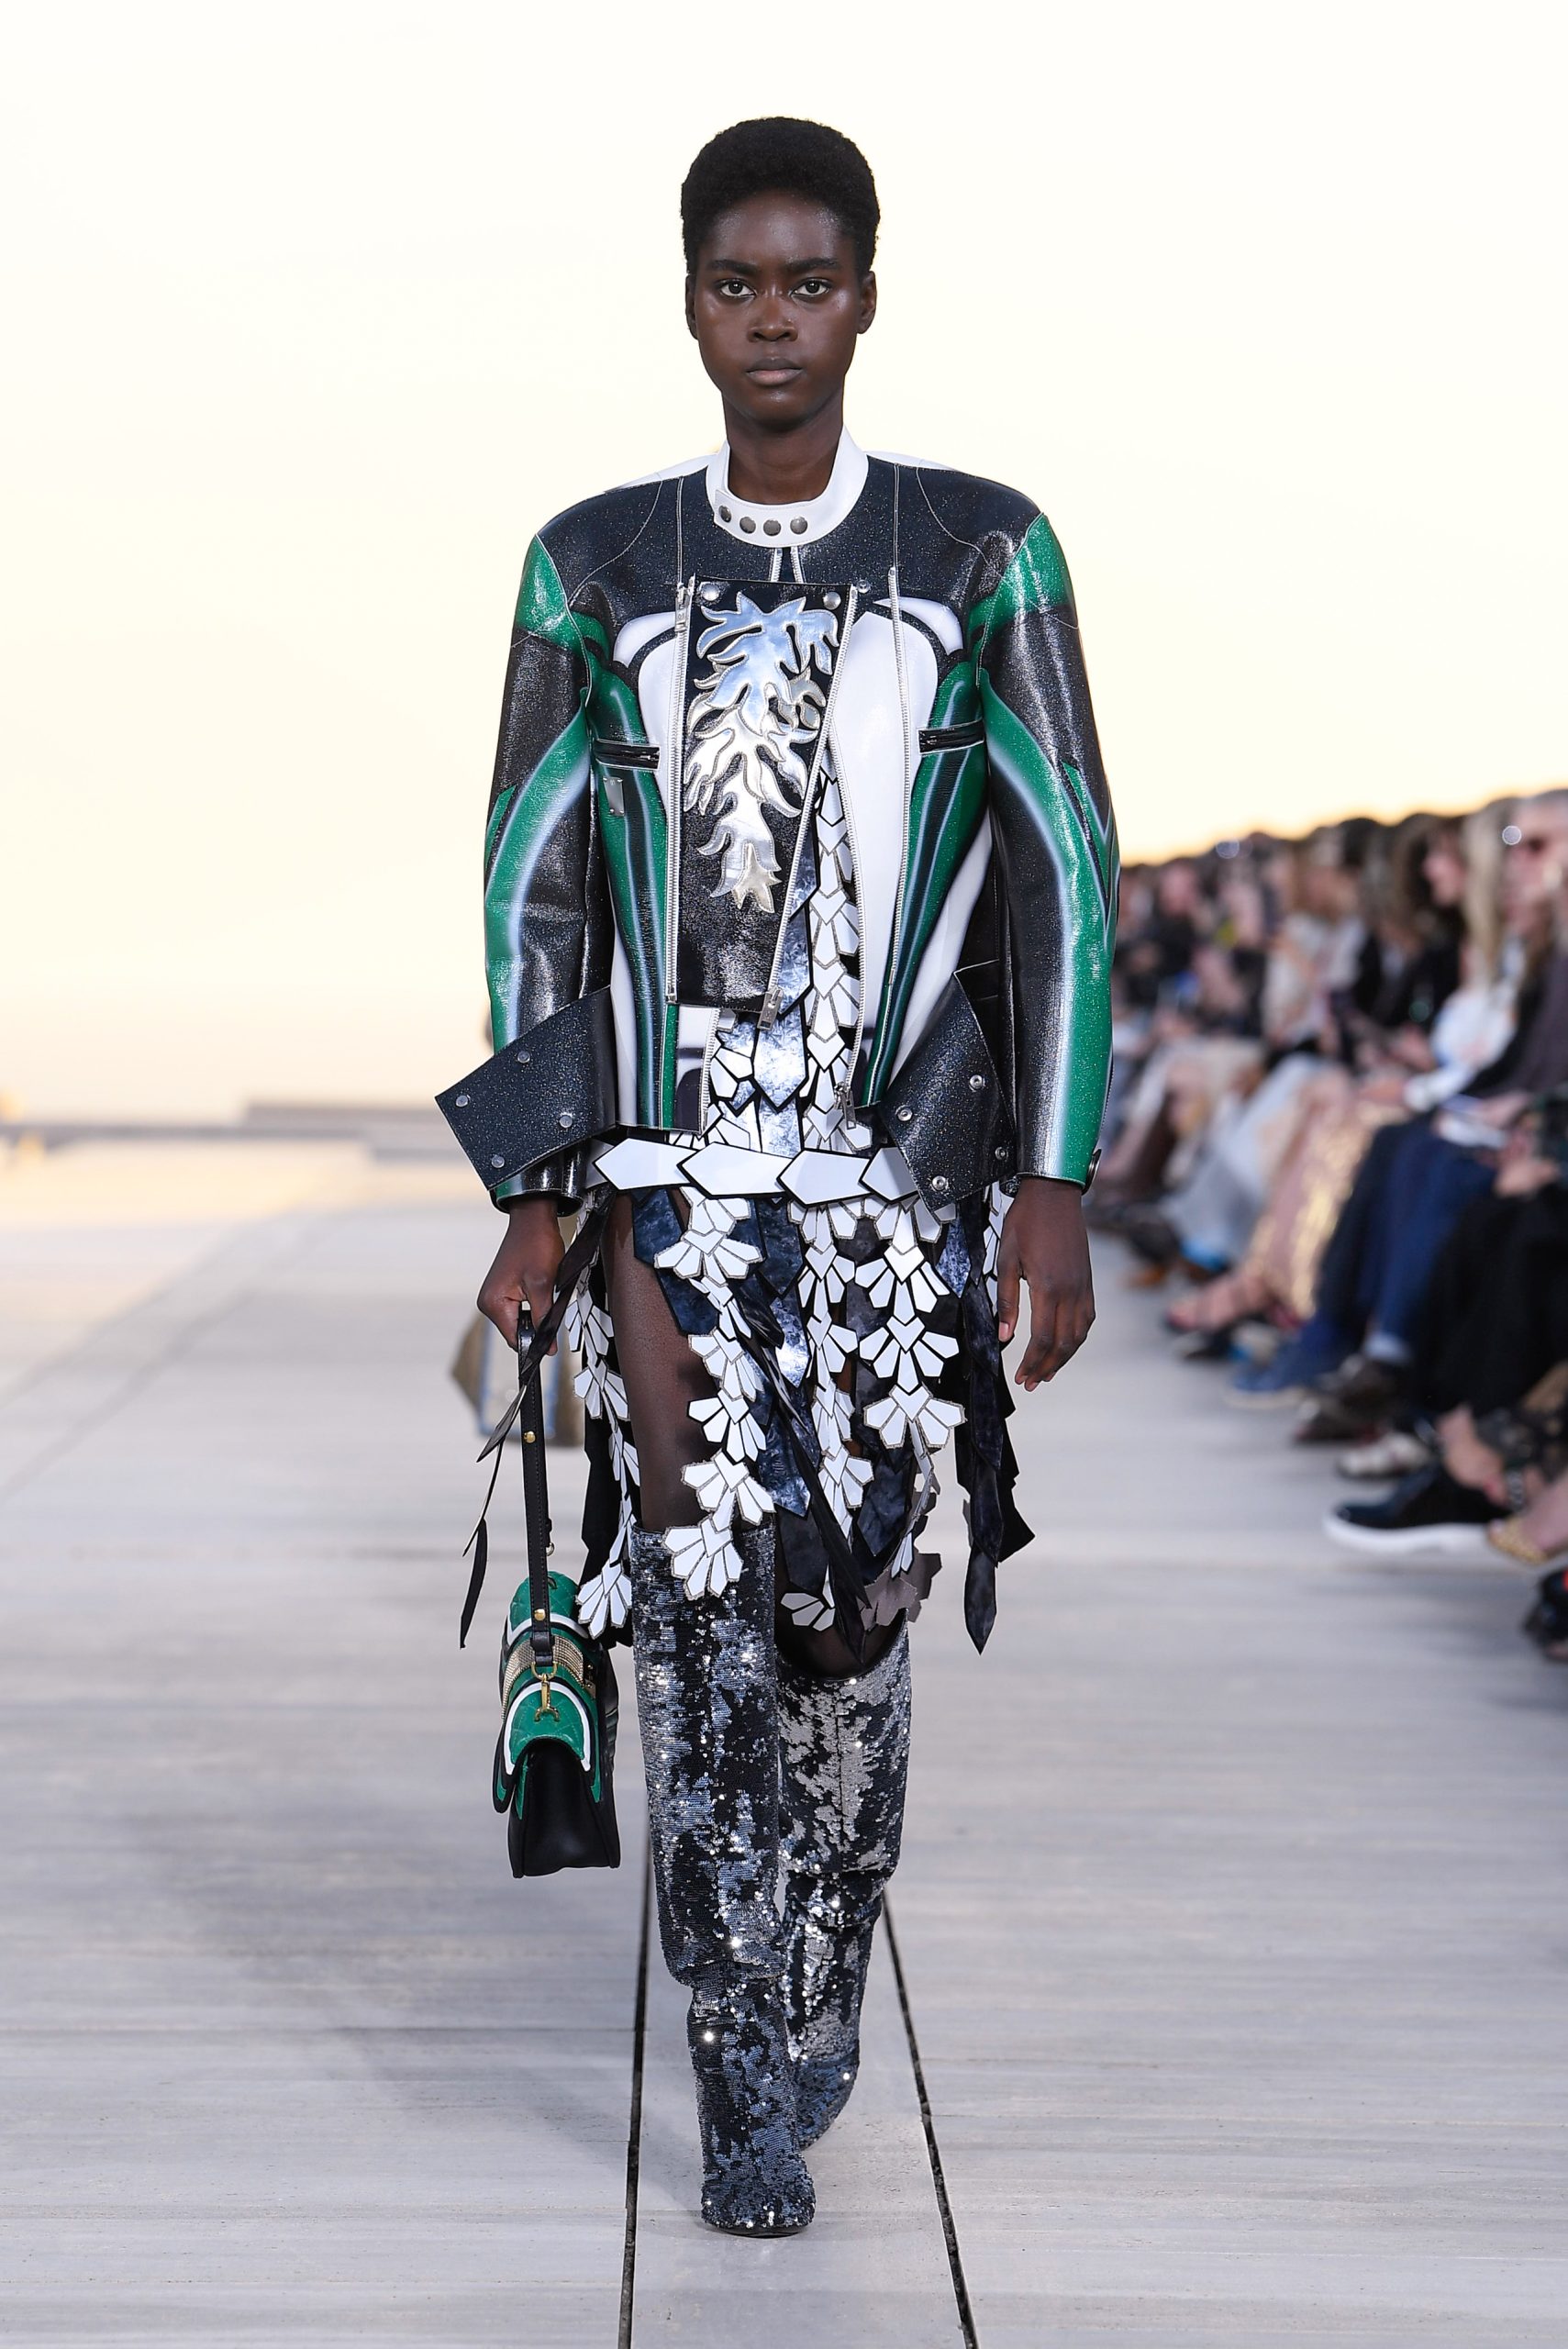 Glass reviews the Louis Vuitton Cruise 2023 collection - The Glass Magazine